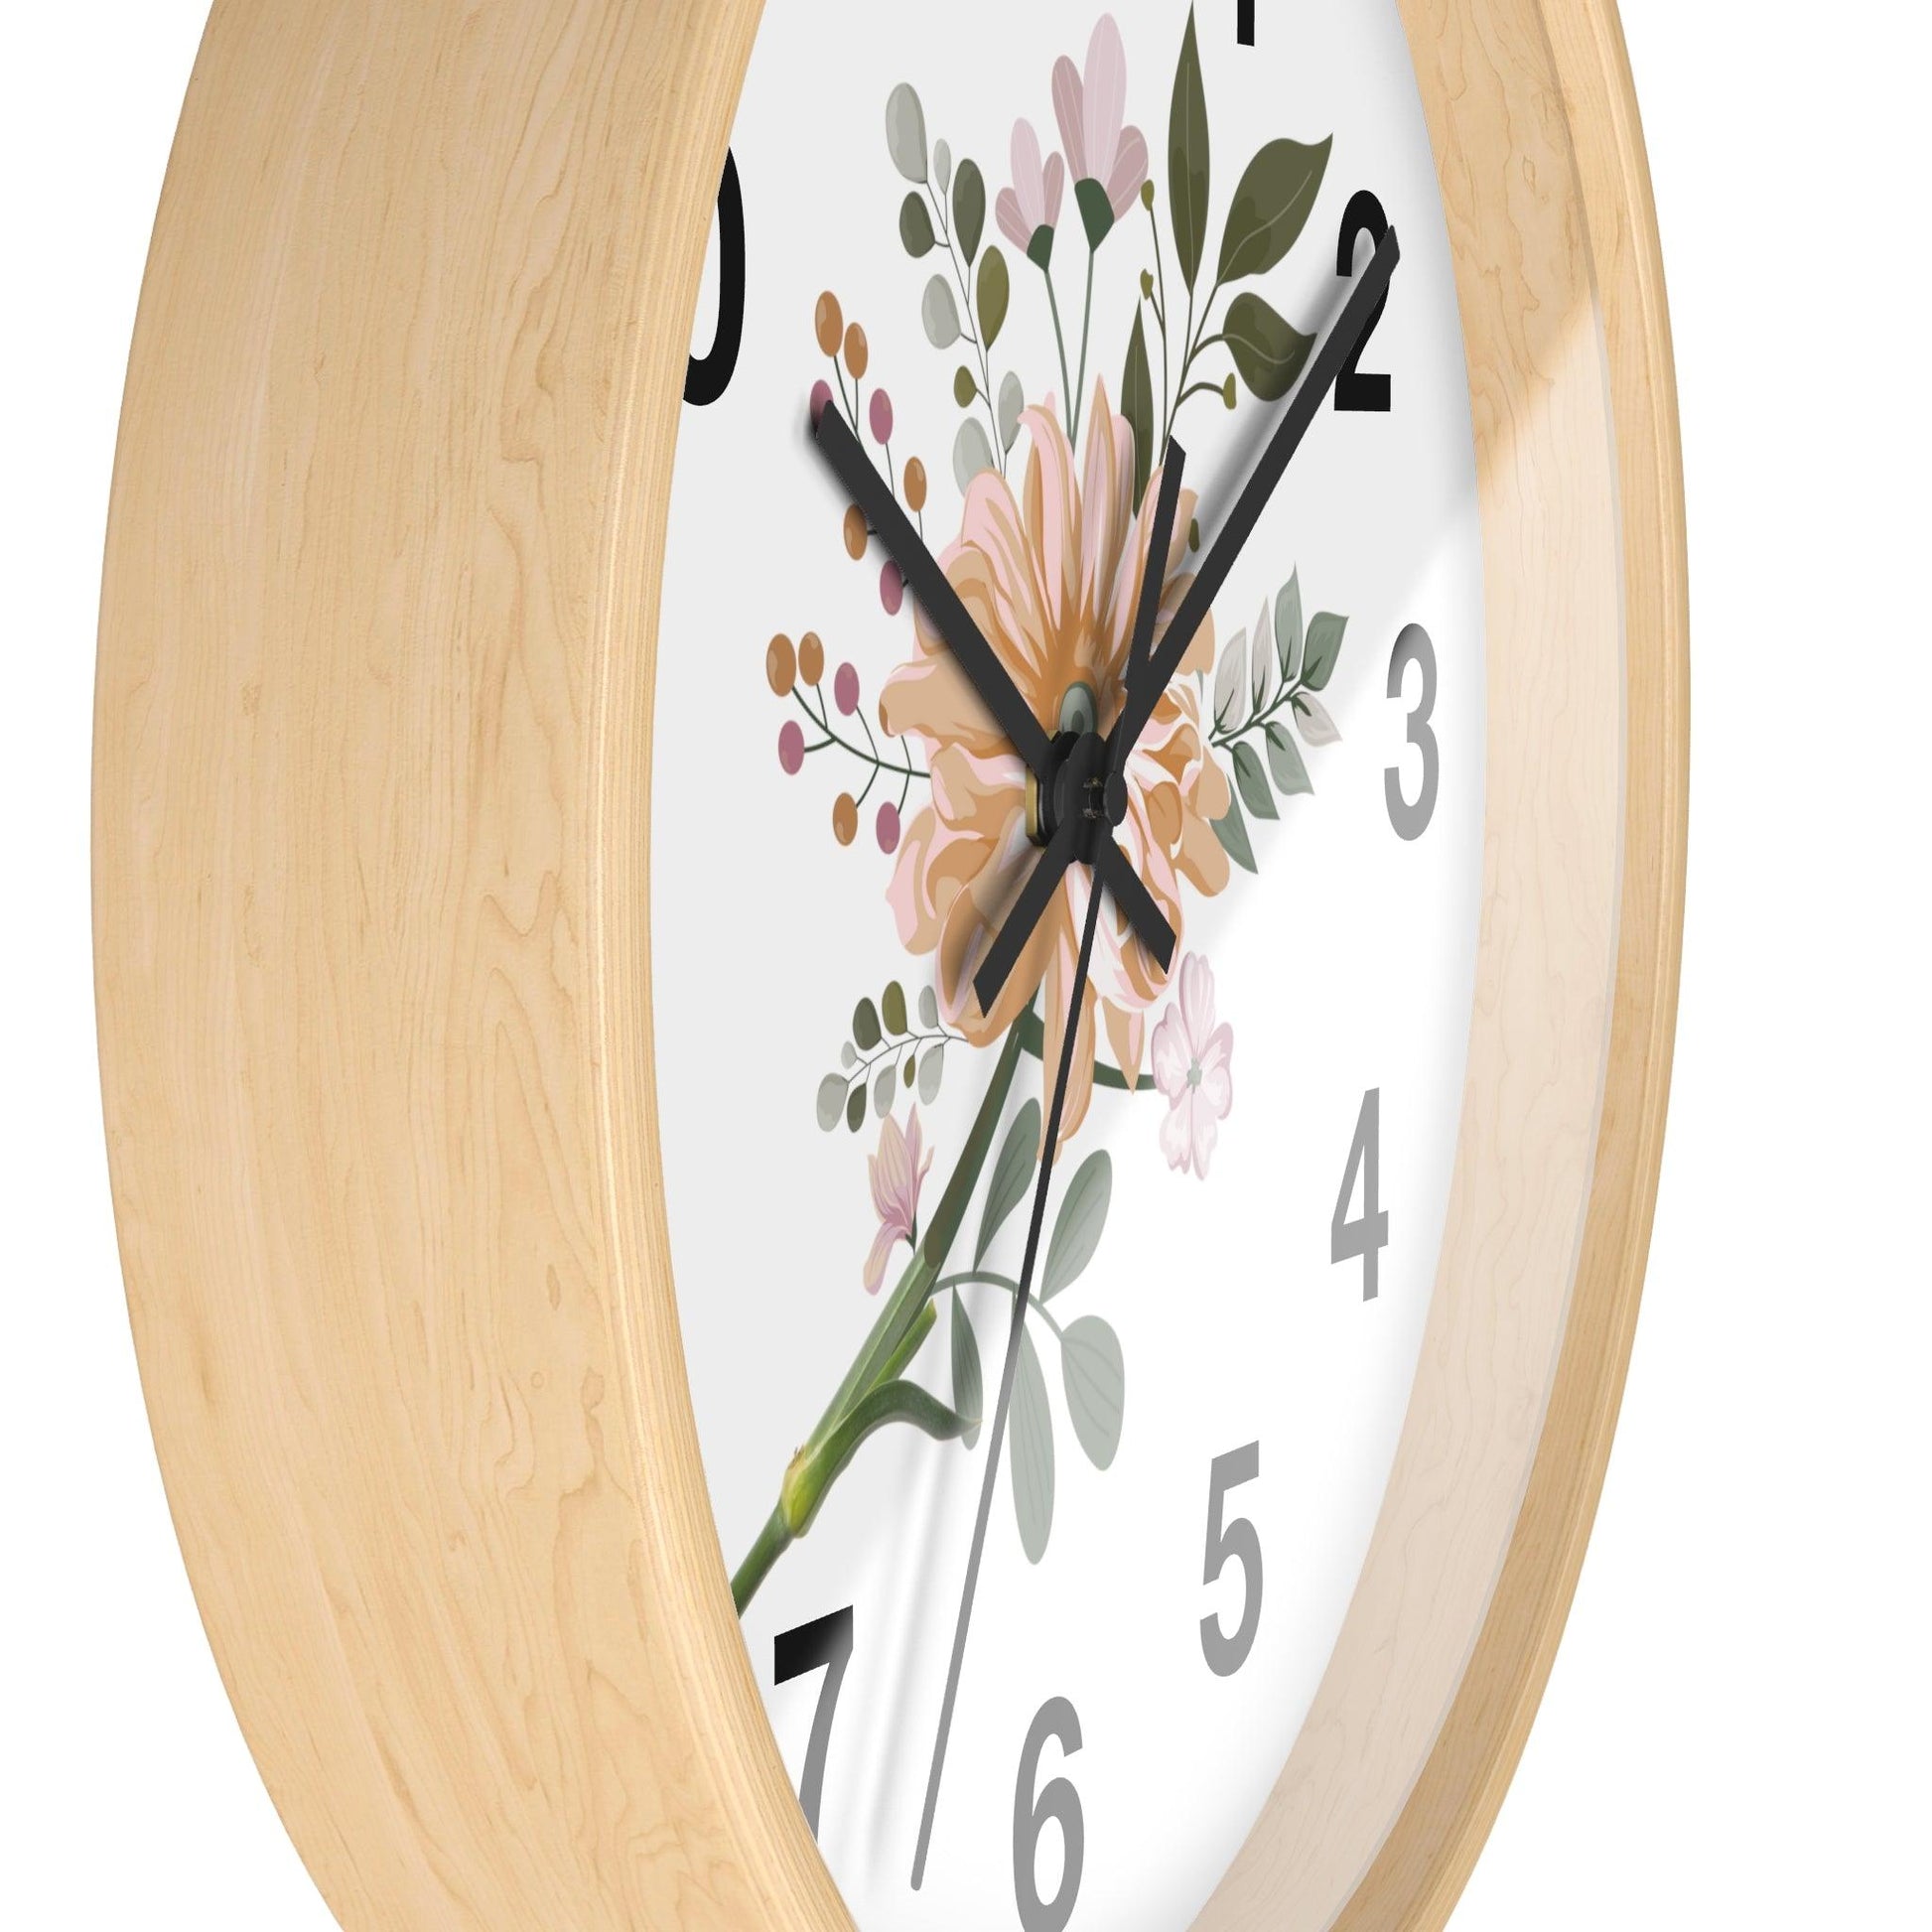 Flower Wall Clock Floral Wall Clock Home Decor Gift House Warming Gift - Mom Gift Unique Gift Farmhouse Clocks For Wall Living Room Bedroom - Giftsmojo